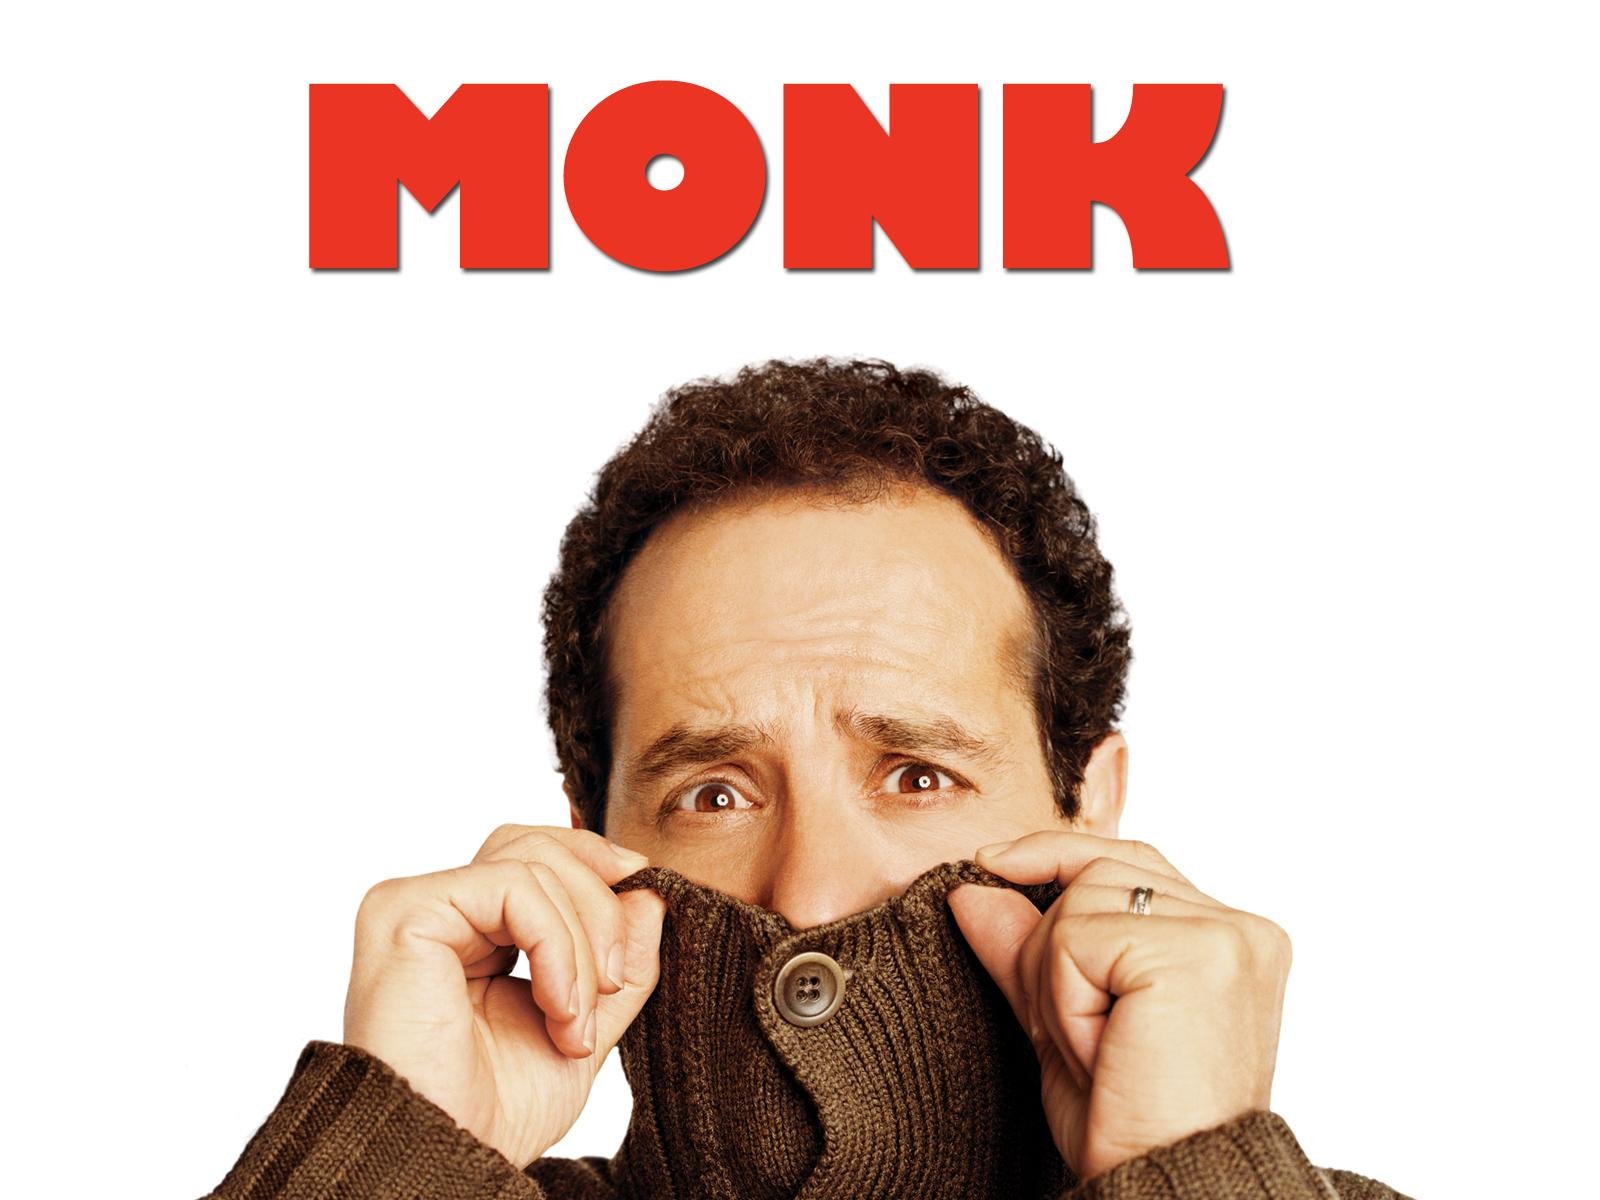 Why Monk Is an OCD Superhero to Me